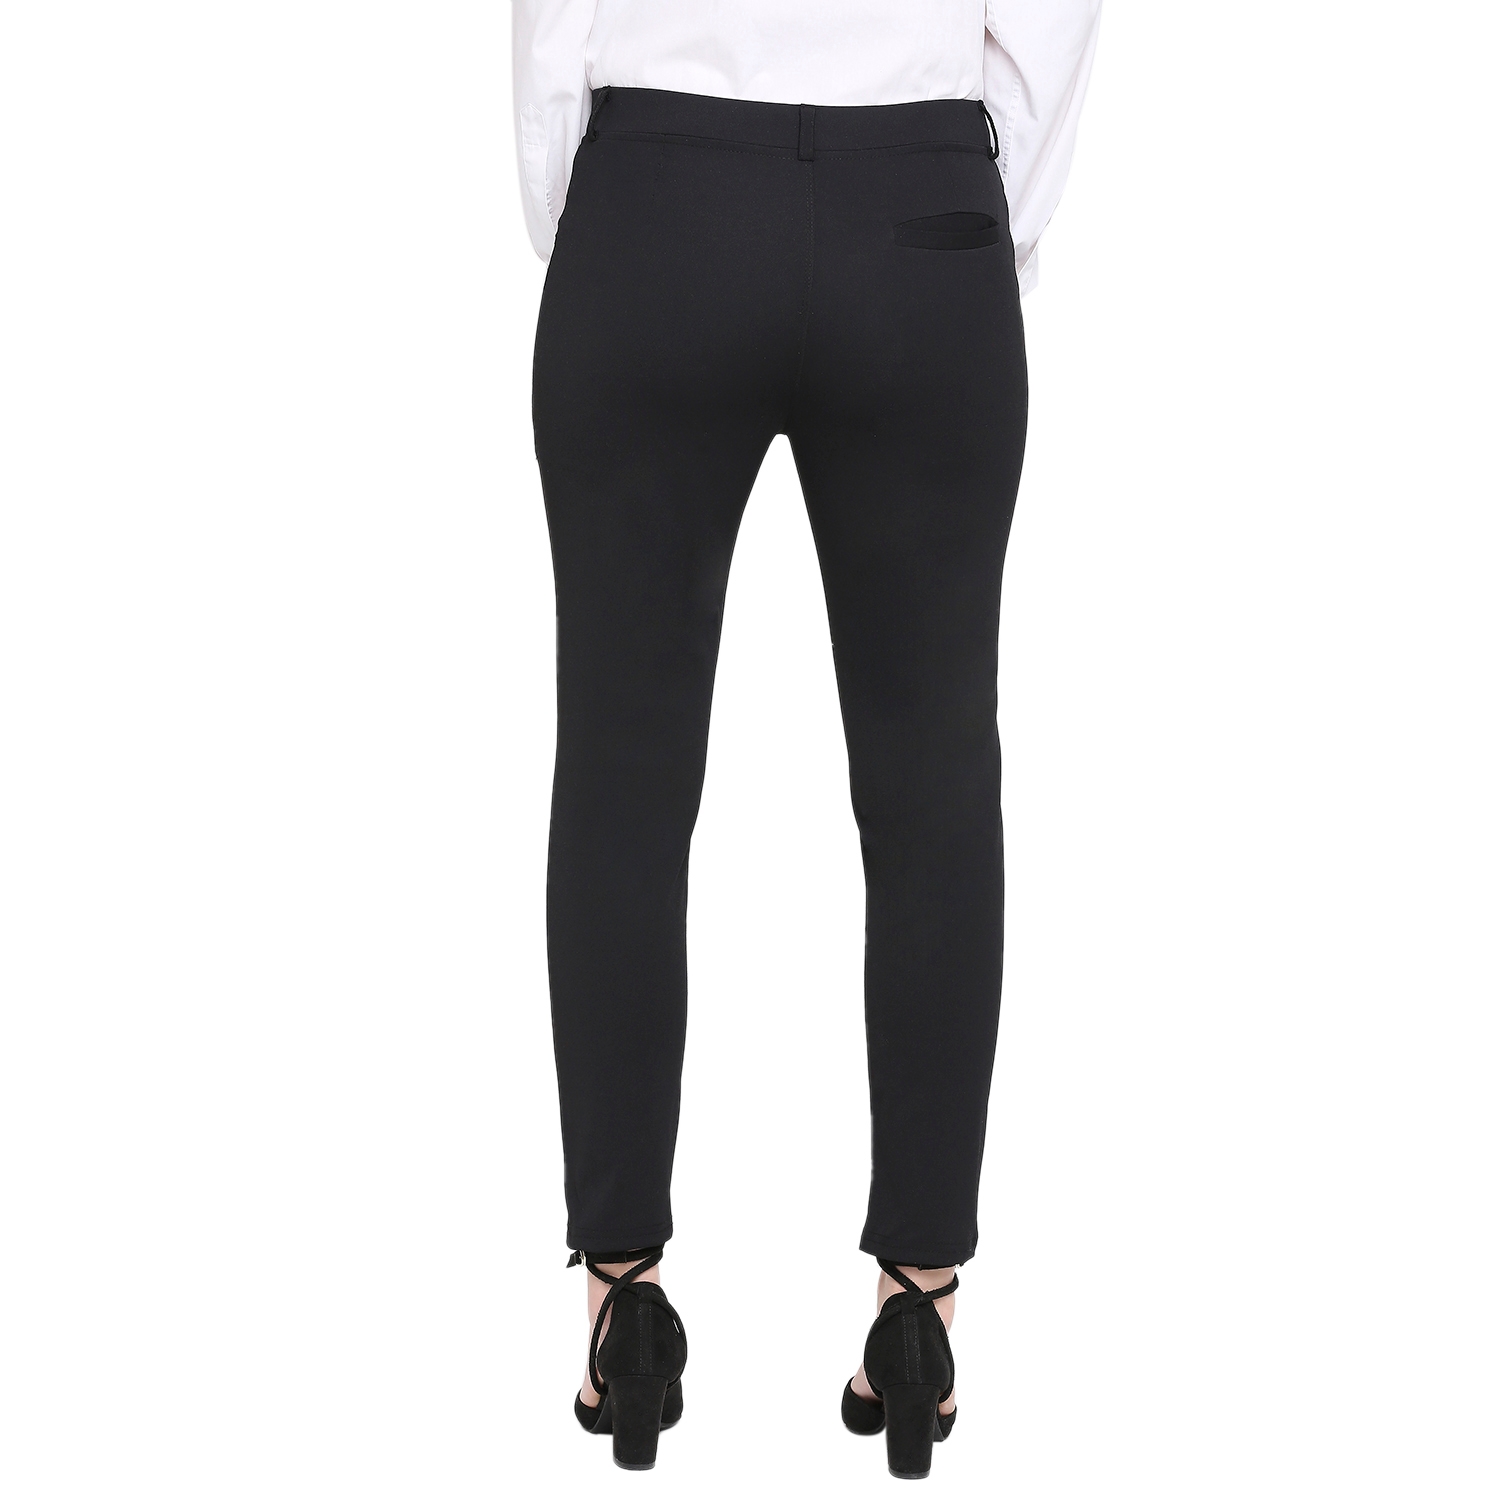 Solly Trousers & Leggings, Allen Solly Black Trousers for Women at  Allensolly.com